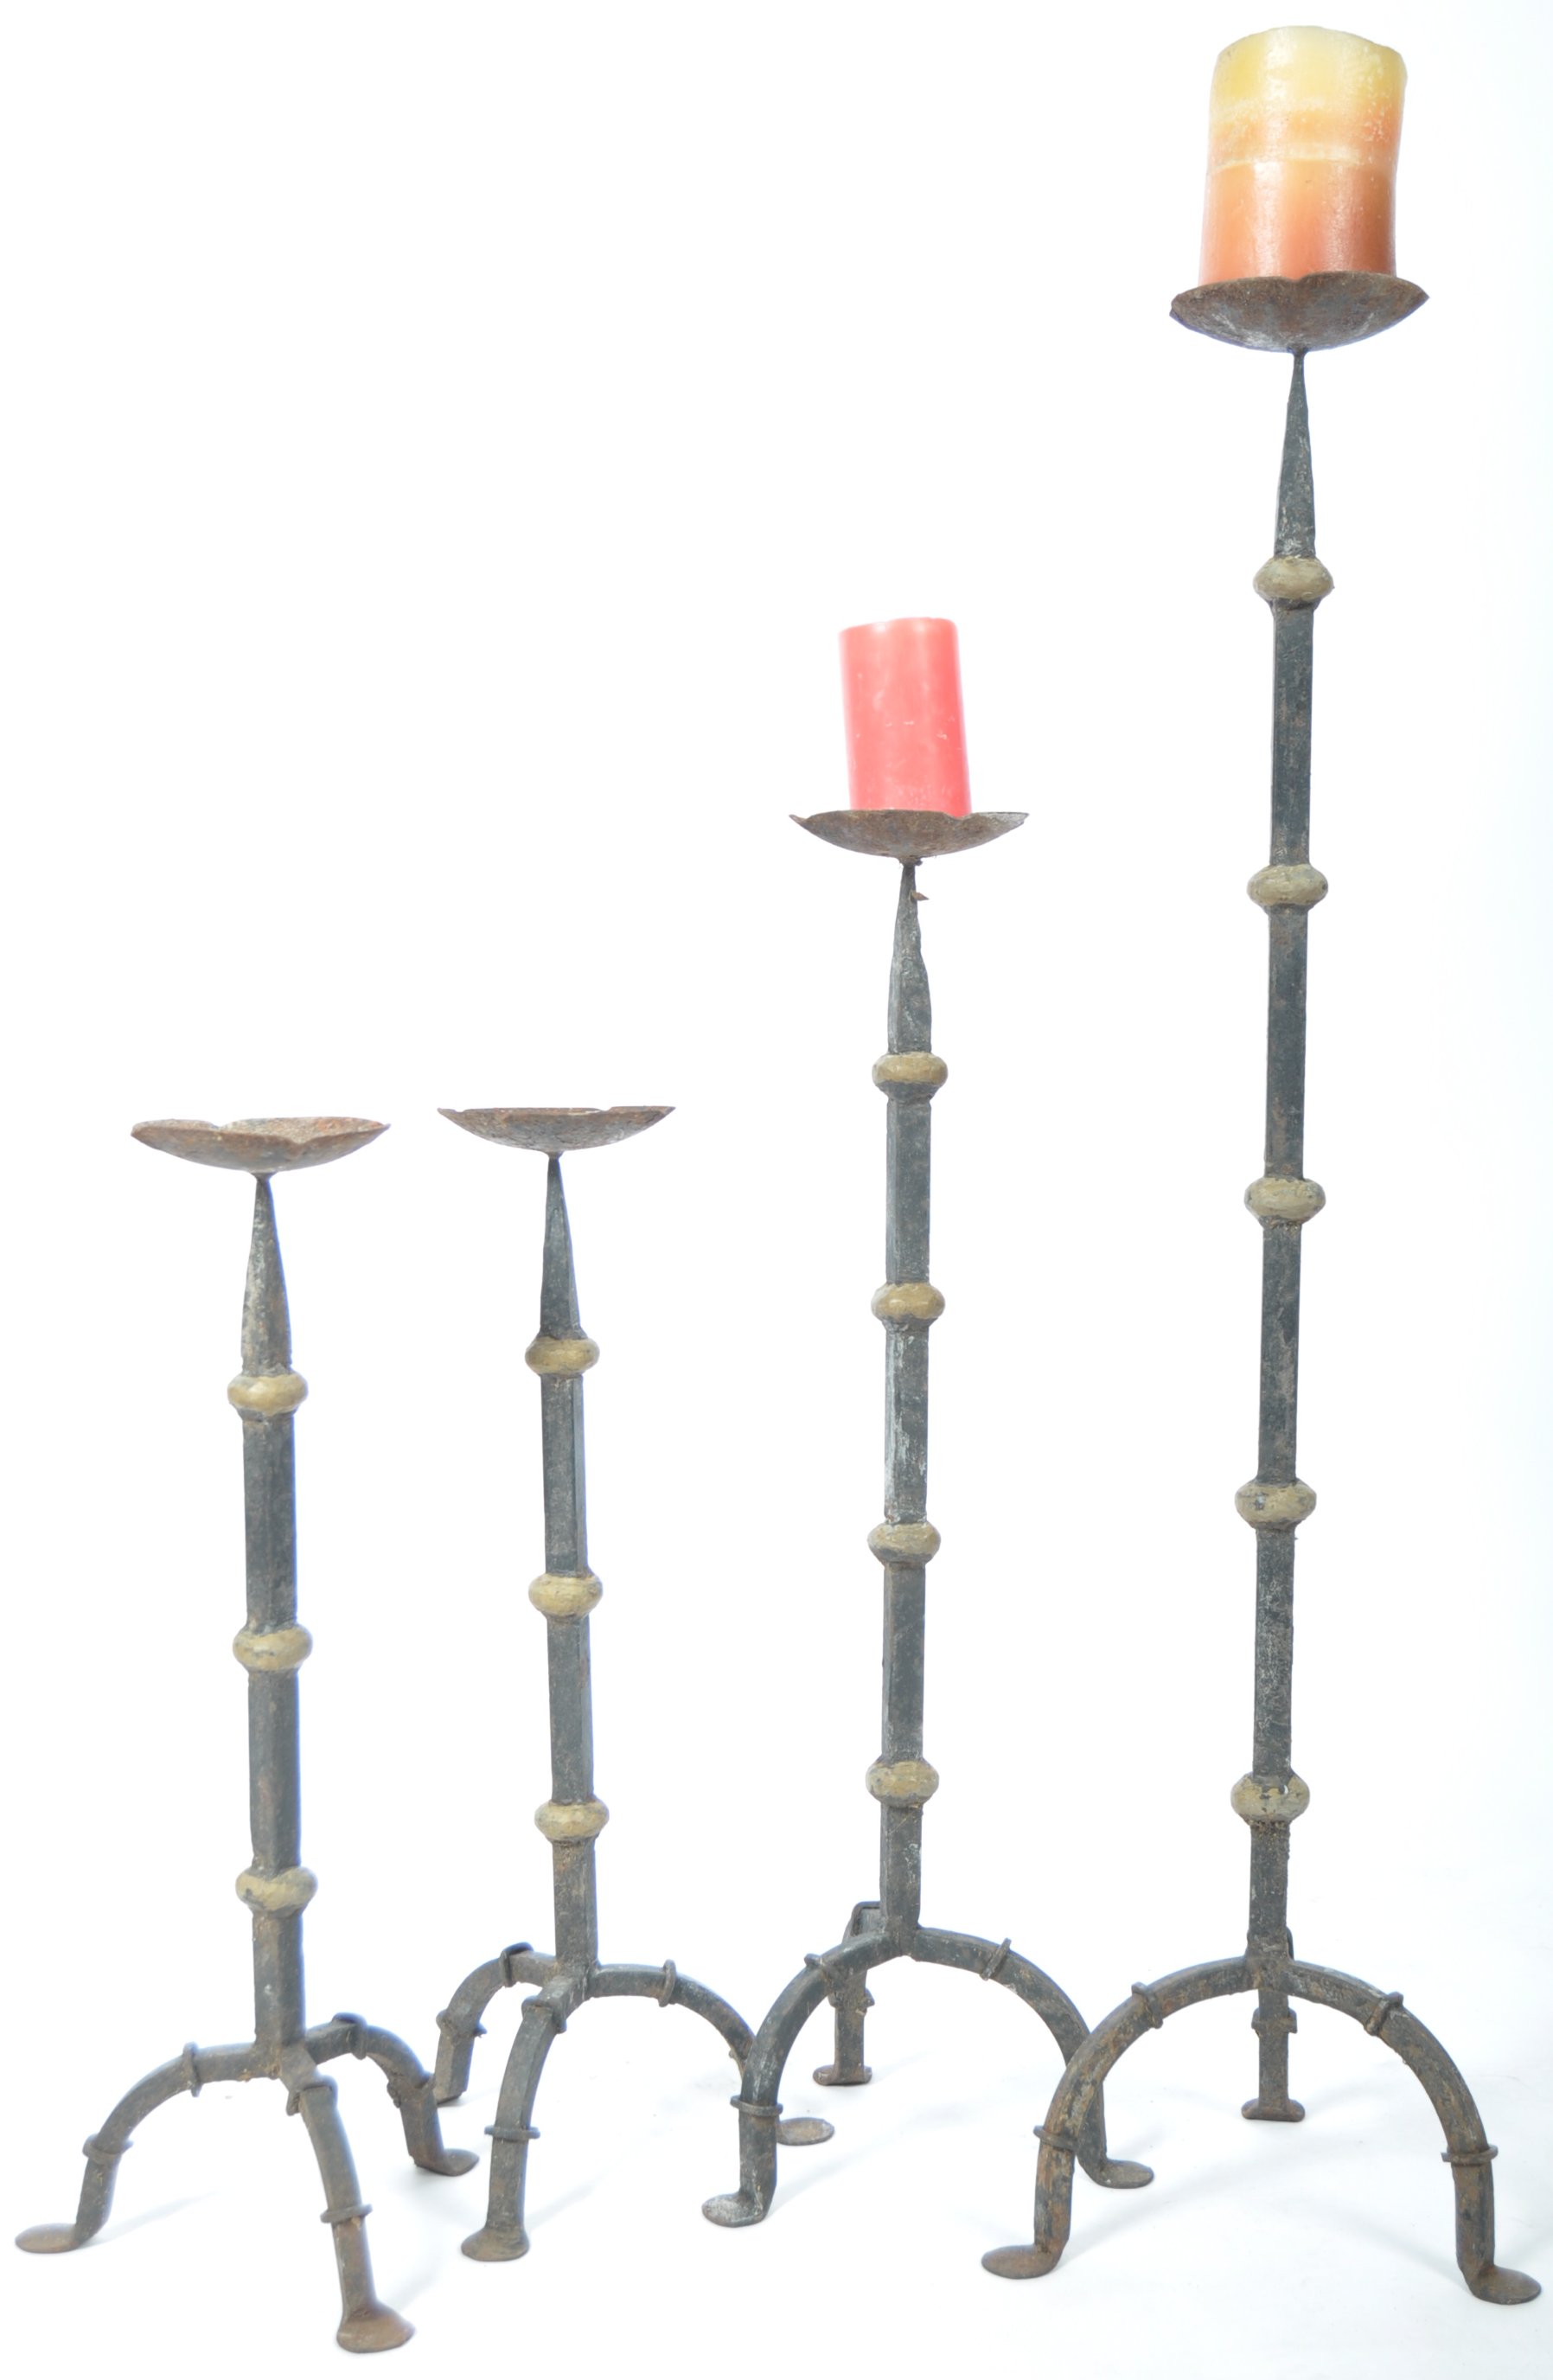 GOOD GROUP OF FOUR VICTORIAN GRADUATING IRON WORK CANDLE HOLDERS